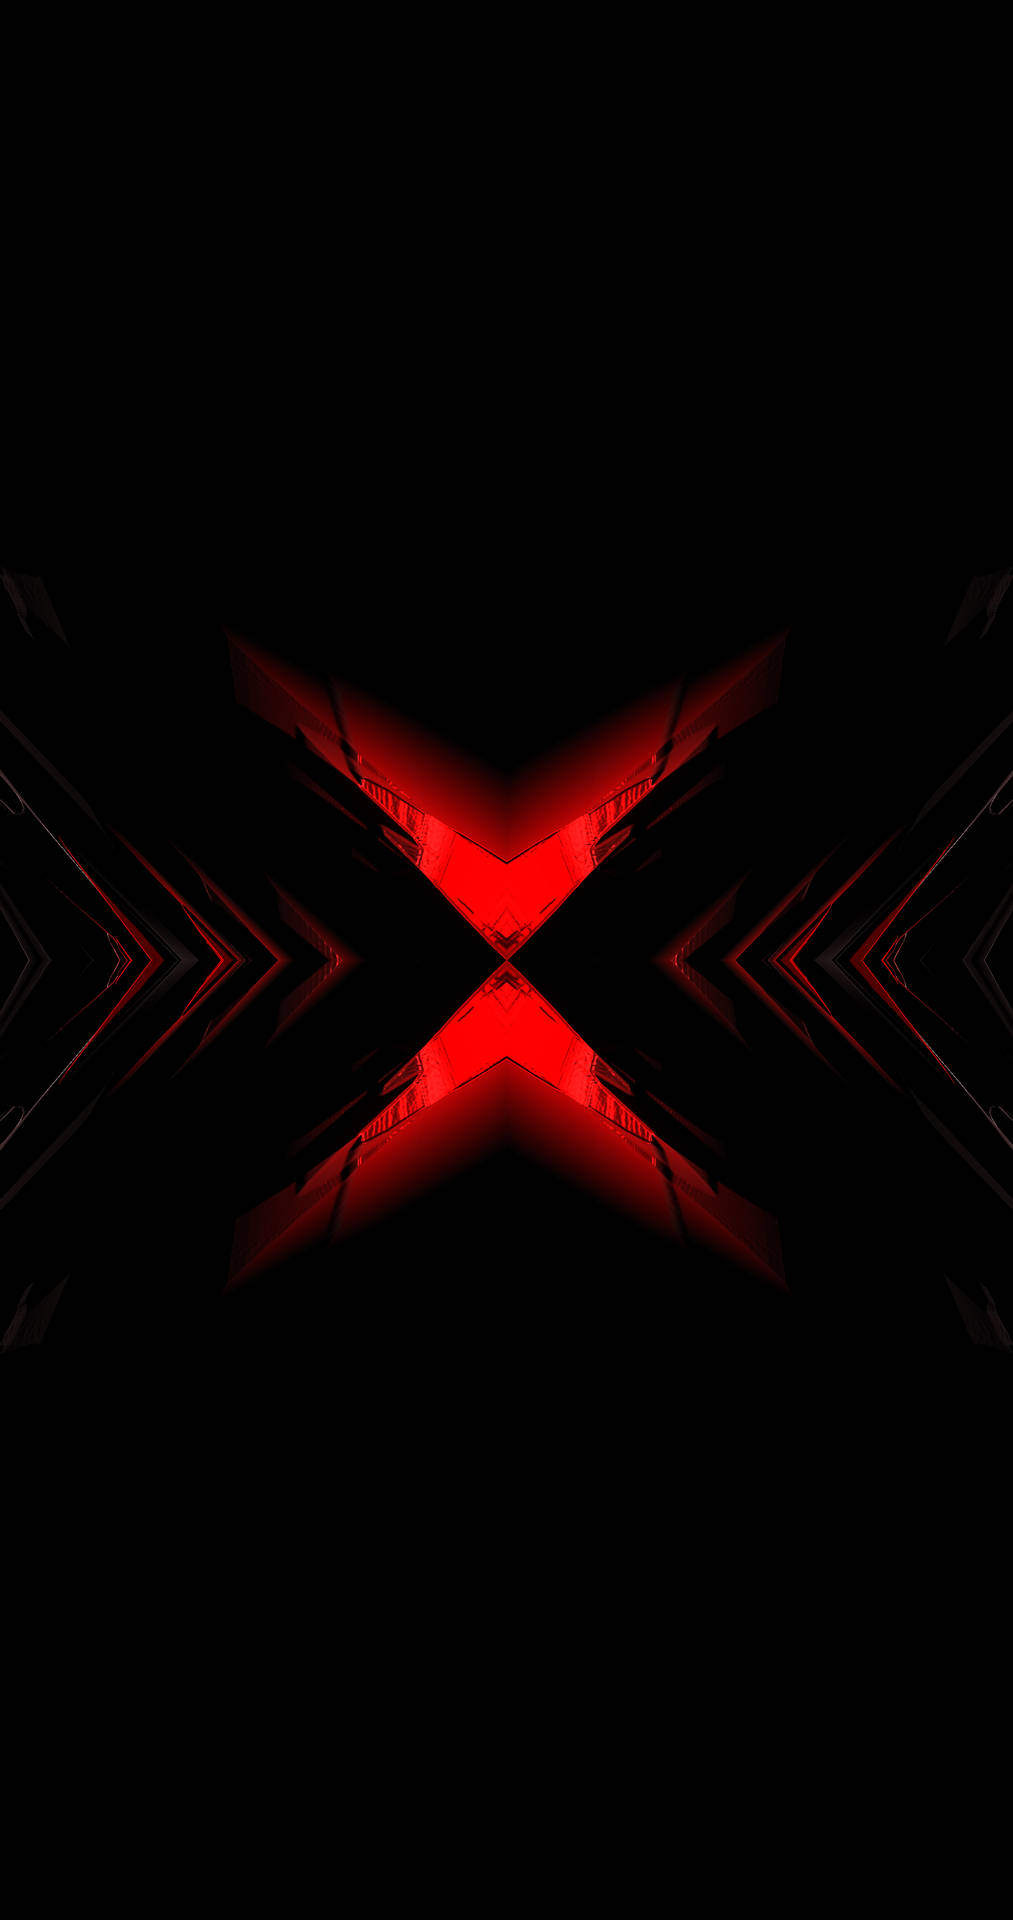 Neon Red And Black Fractal Art Background